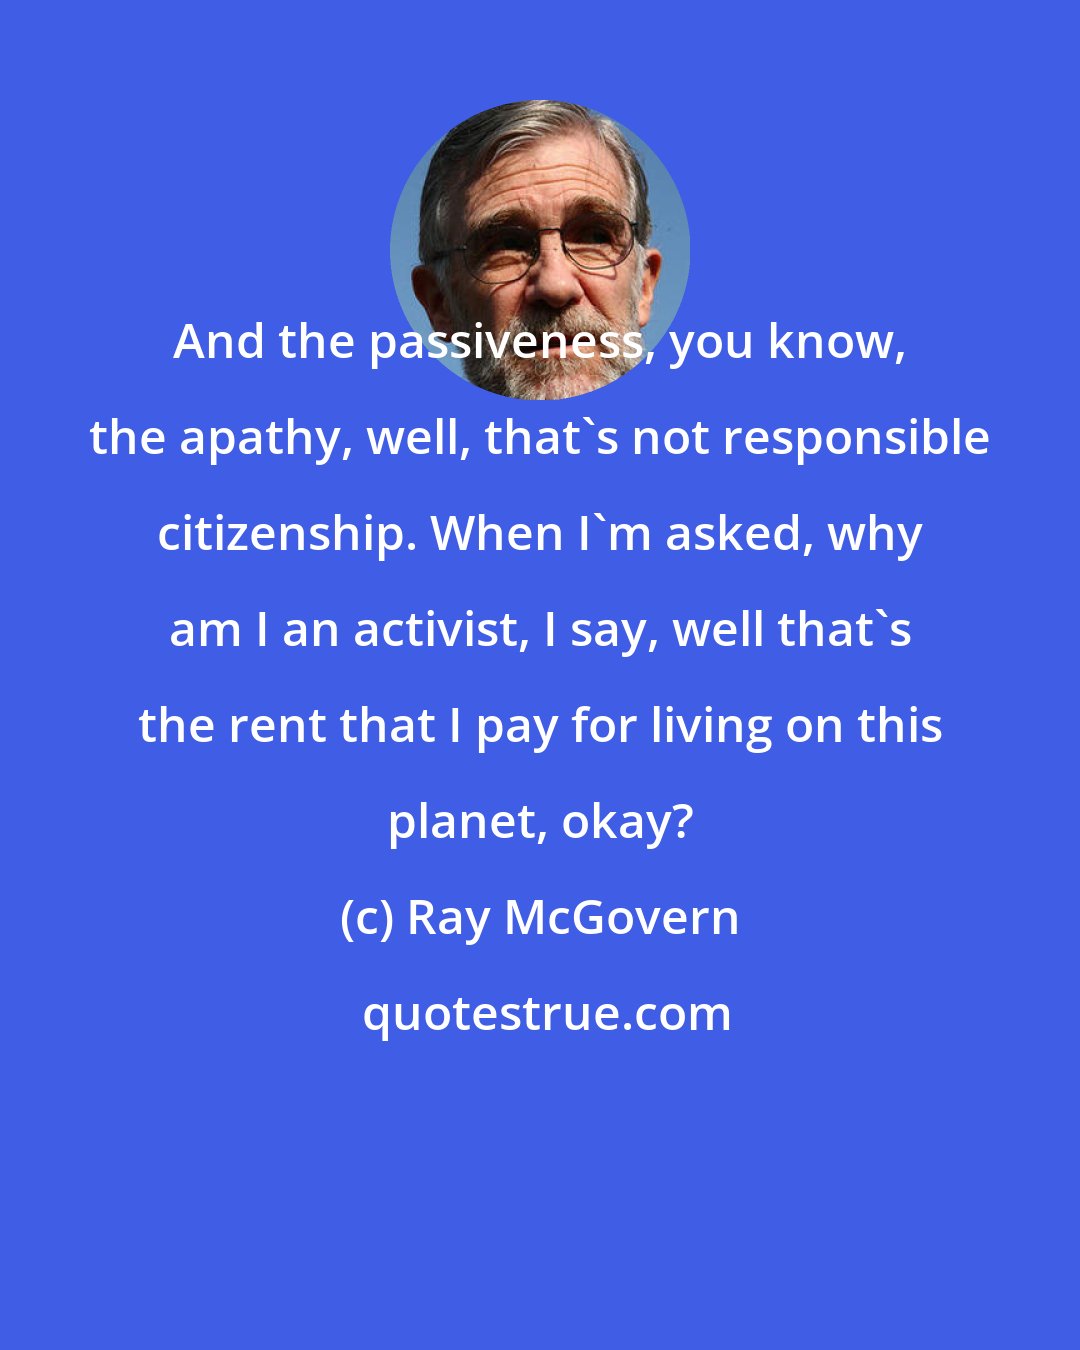 Ray McGovern: And the passiveness, you know, the apathy, well, that's not responsible citizenship. When I'm asked, why am I an activist, I say, well that's the rent that I pay for living on this planet, okay?